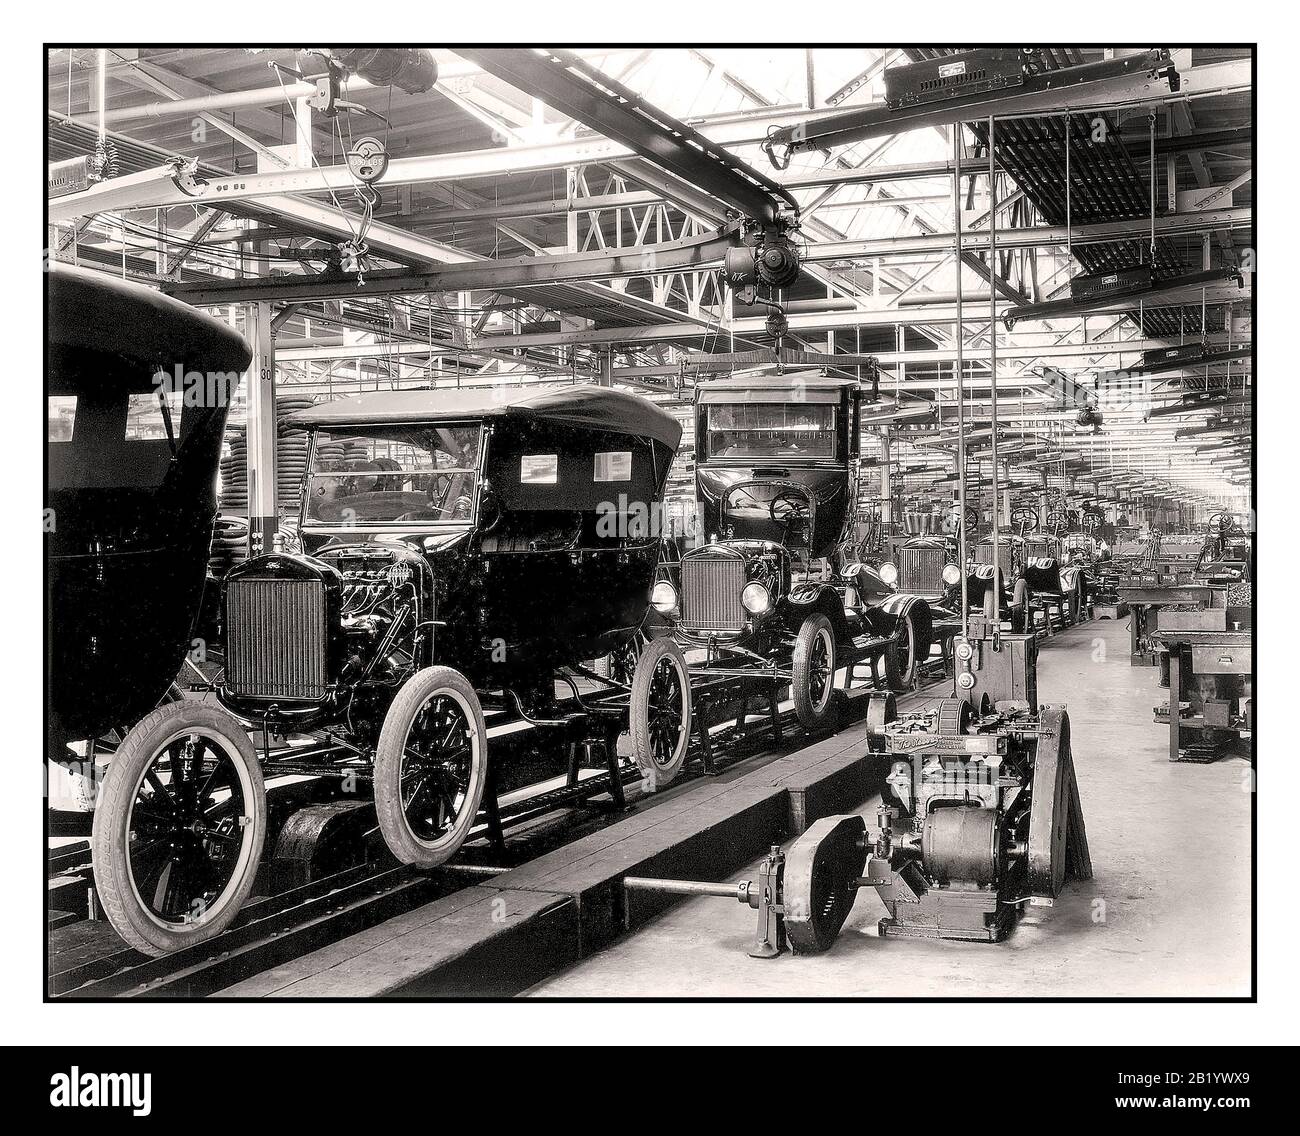 Archive 1900’s Ford Company Model T motorcar assembly line The creation of the moving assembly line by Henry Ford at his Highland Park plant, introduced on December 1, 1913, revolutionized the automobile industry and the concept of manufacturing worldwide.  Sheer production of the Model T dramatically increased. The production time for a single car dropped from over 12 hours to just 93 minutes due to the introduction of the assembly line. Ford’s 1914 production rate of 308,162 eclipsed the number of cars produced by all other automobile manufacturers combined. Detroit Michigan USA Stock Photo